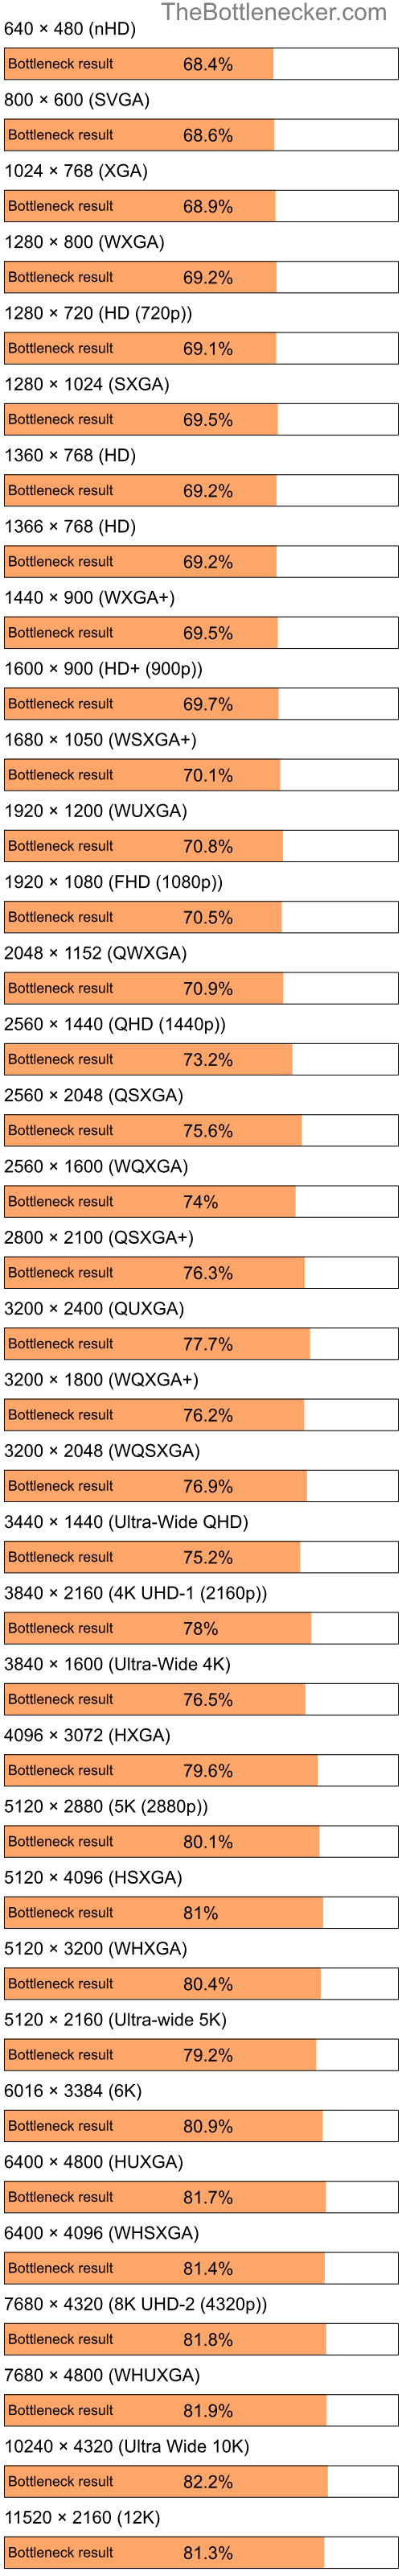 Bottleneck results by resolution for Intel Pentium 4 and NVIDIA GeForce G210 in Graphic Card Intense Tasks